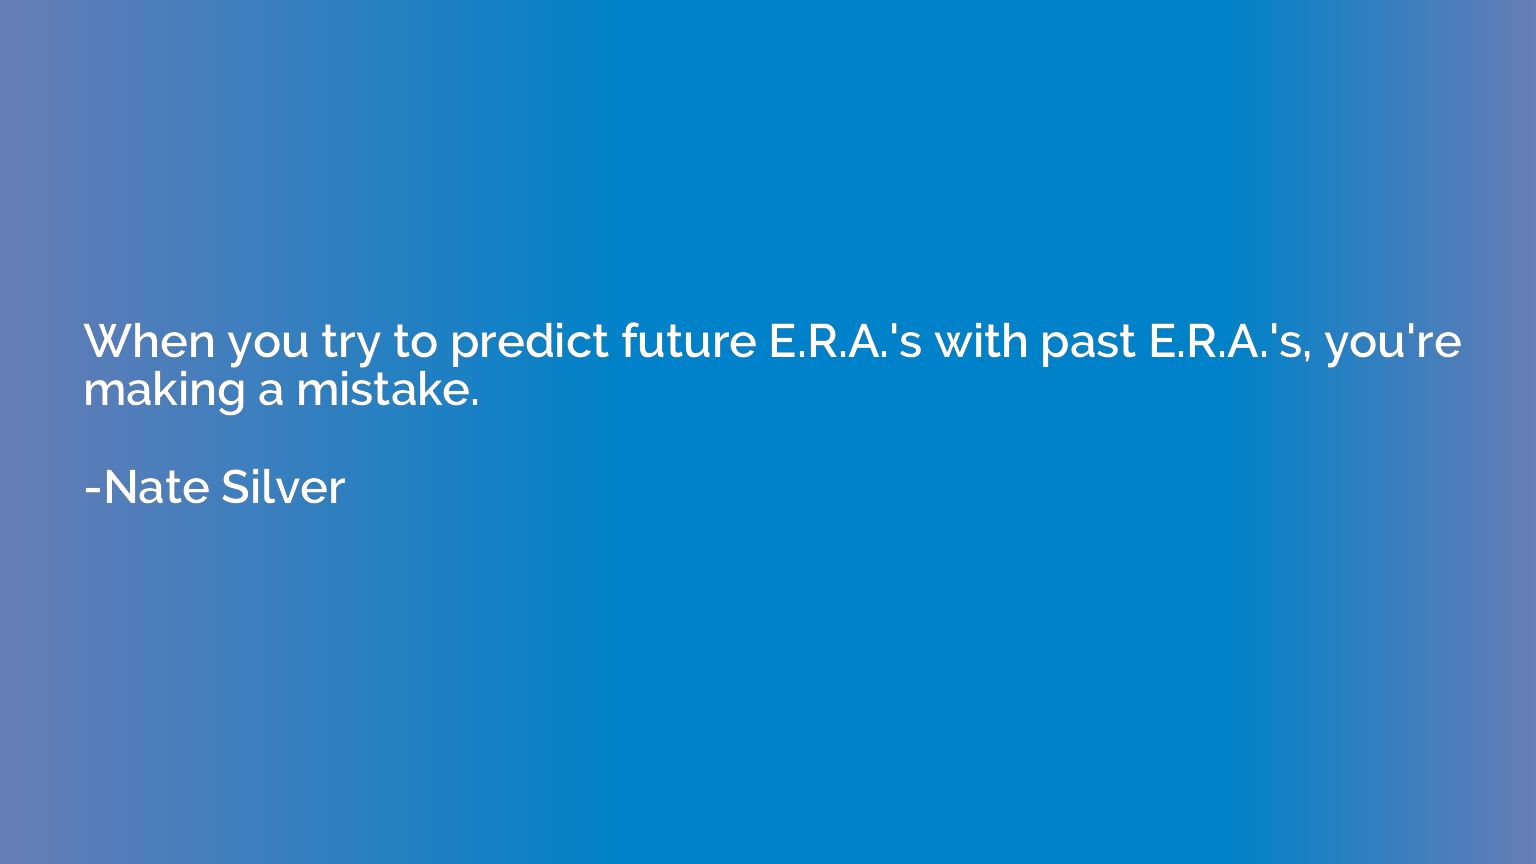 When you try to predict future E.R.A.'s with past E.R.A.'s, 